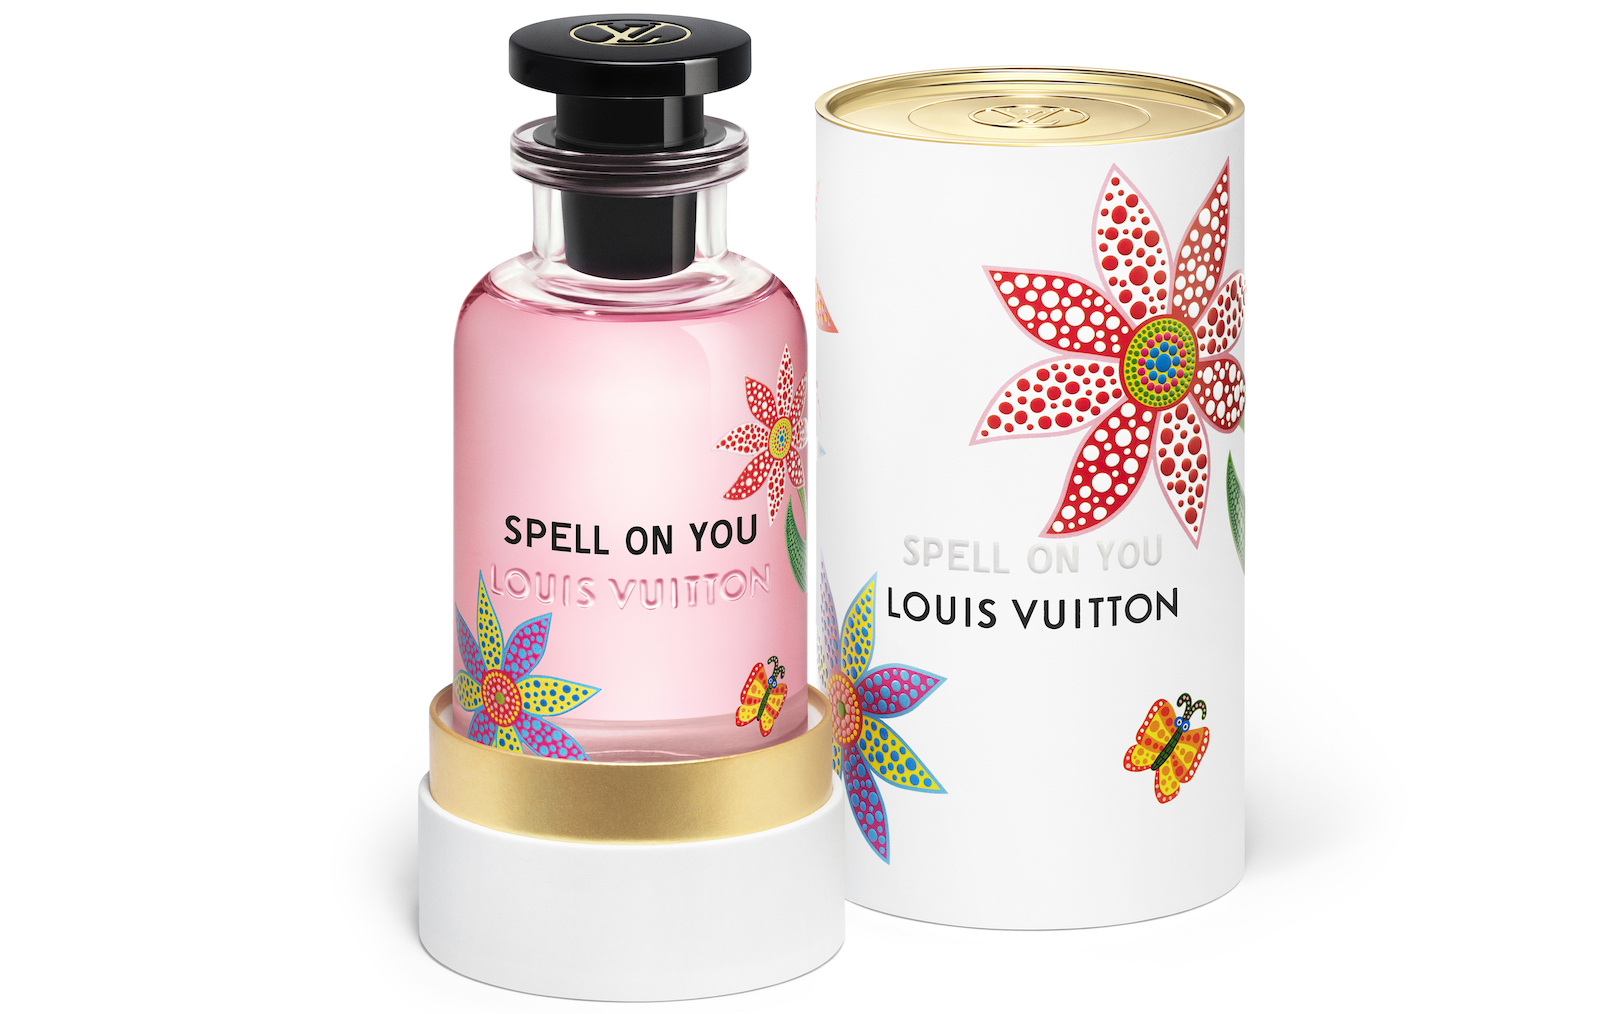 Perfume bottle and packaging with colourful flowers on them